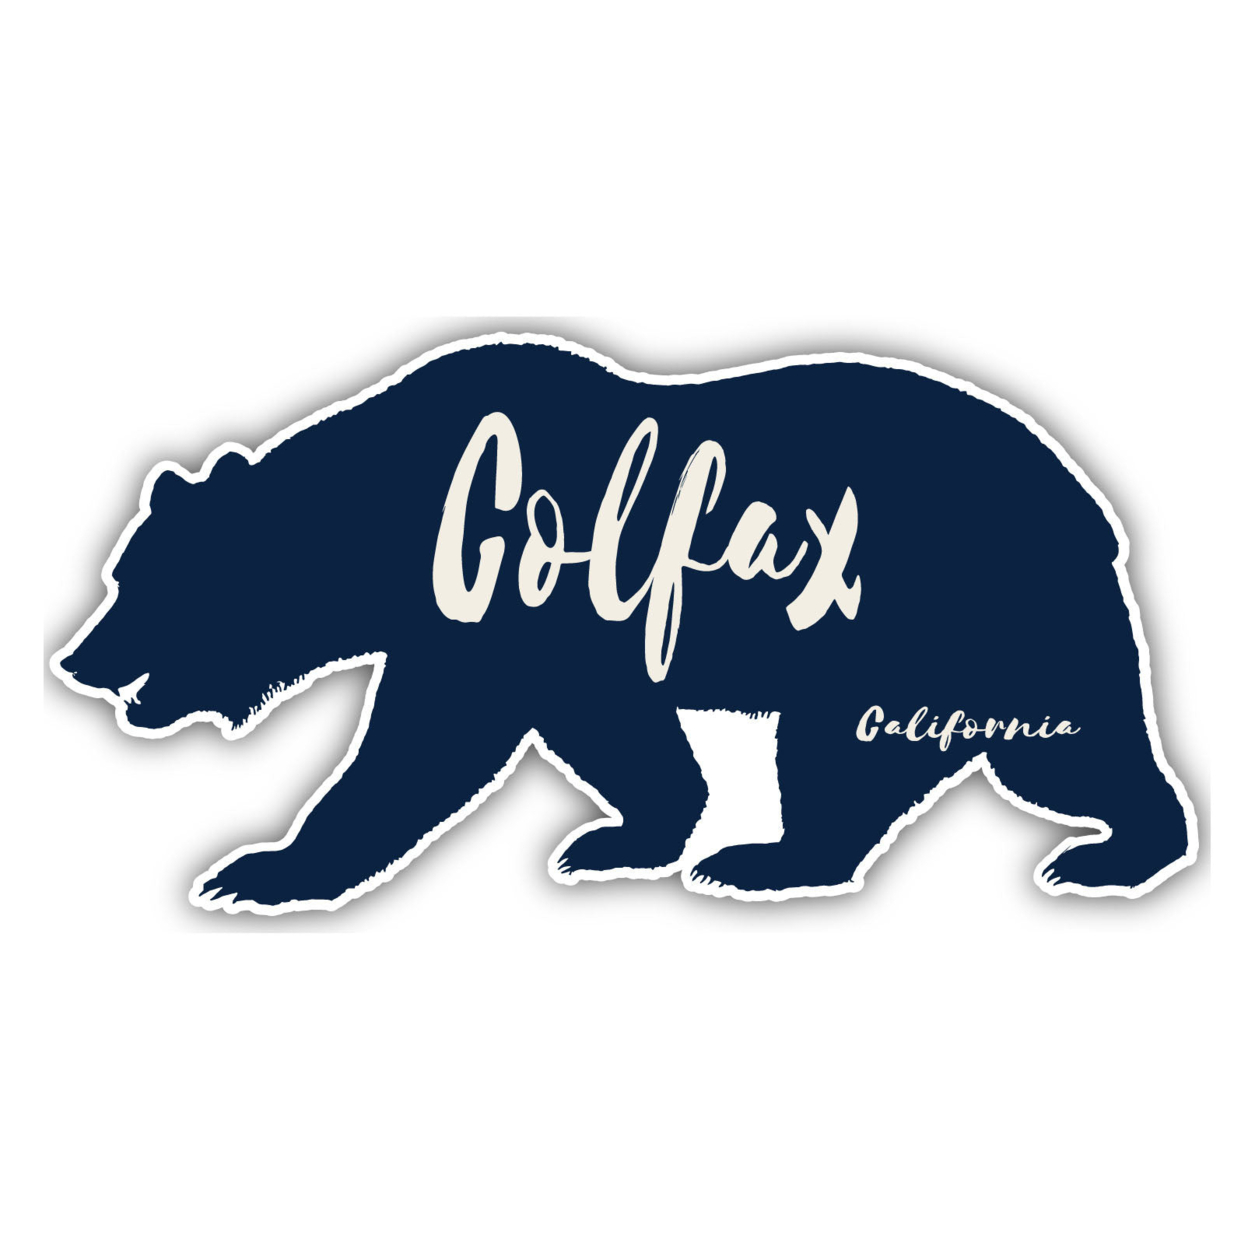 Colfax California Souvenir Decorative Stickers (Choose Theme And Size) - 4-Pack, 8-Inch, Bear